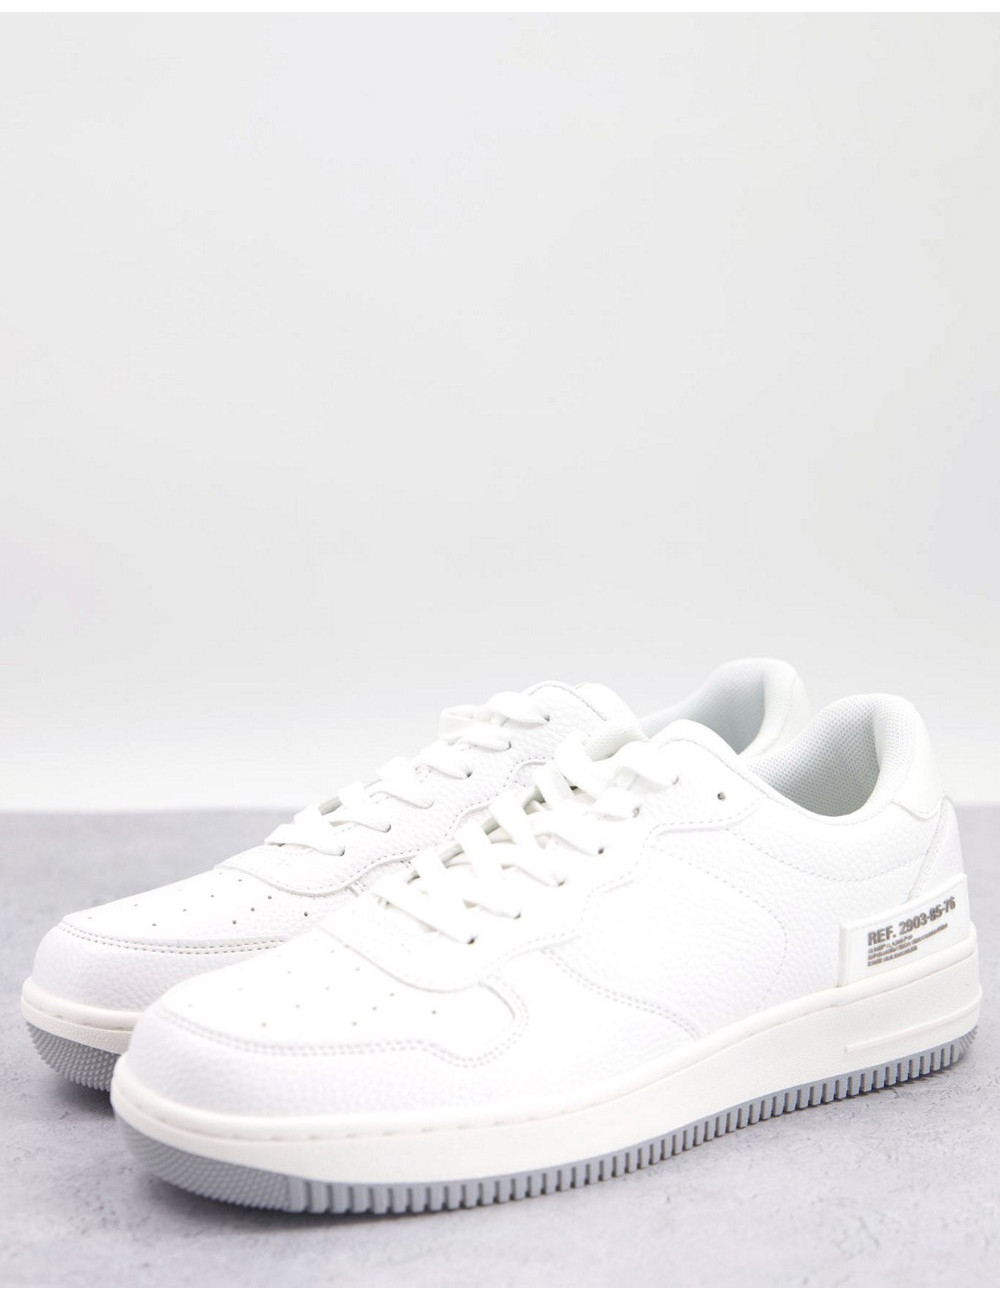 River Island trainers in white